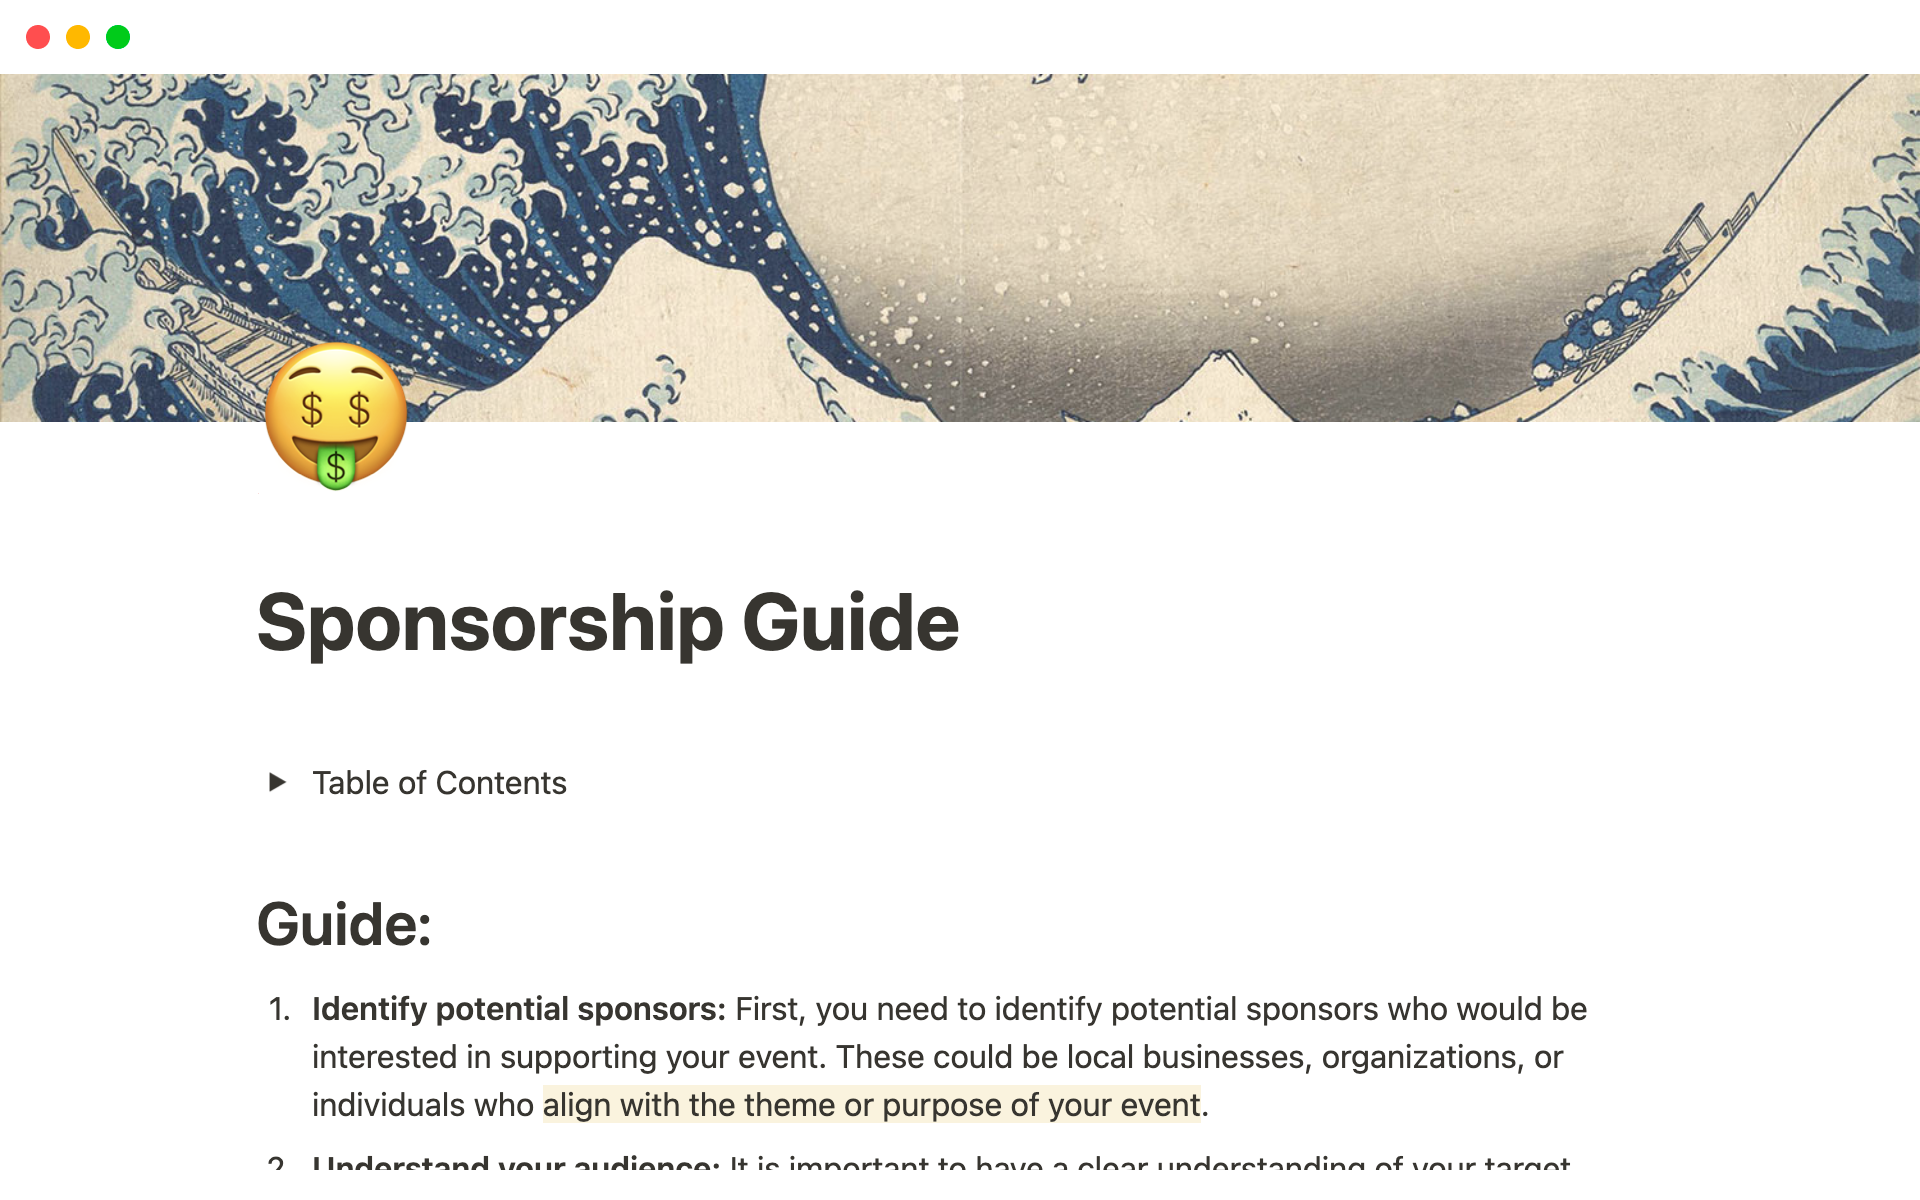 Guide to getting sponsors